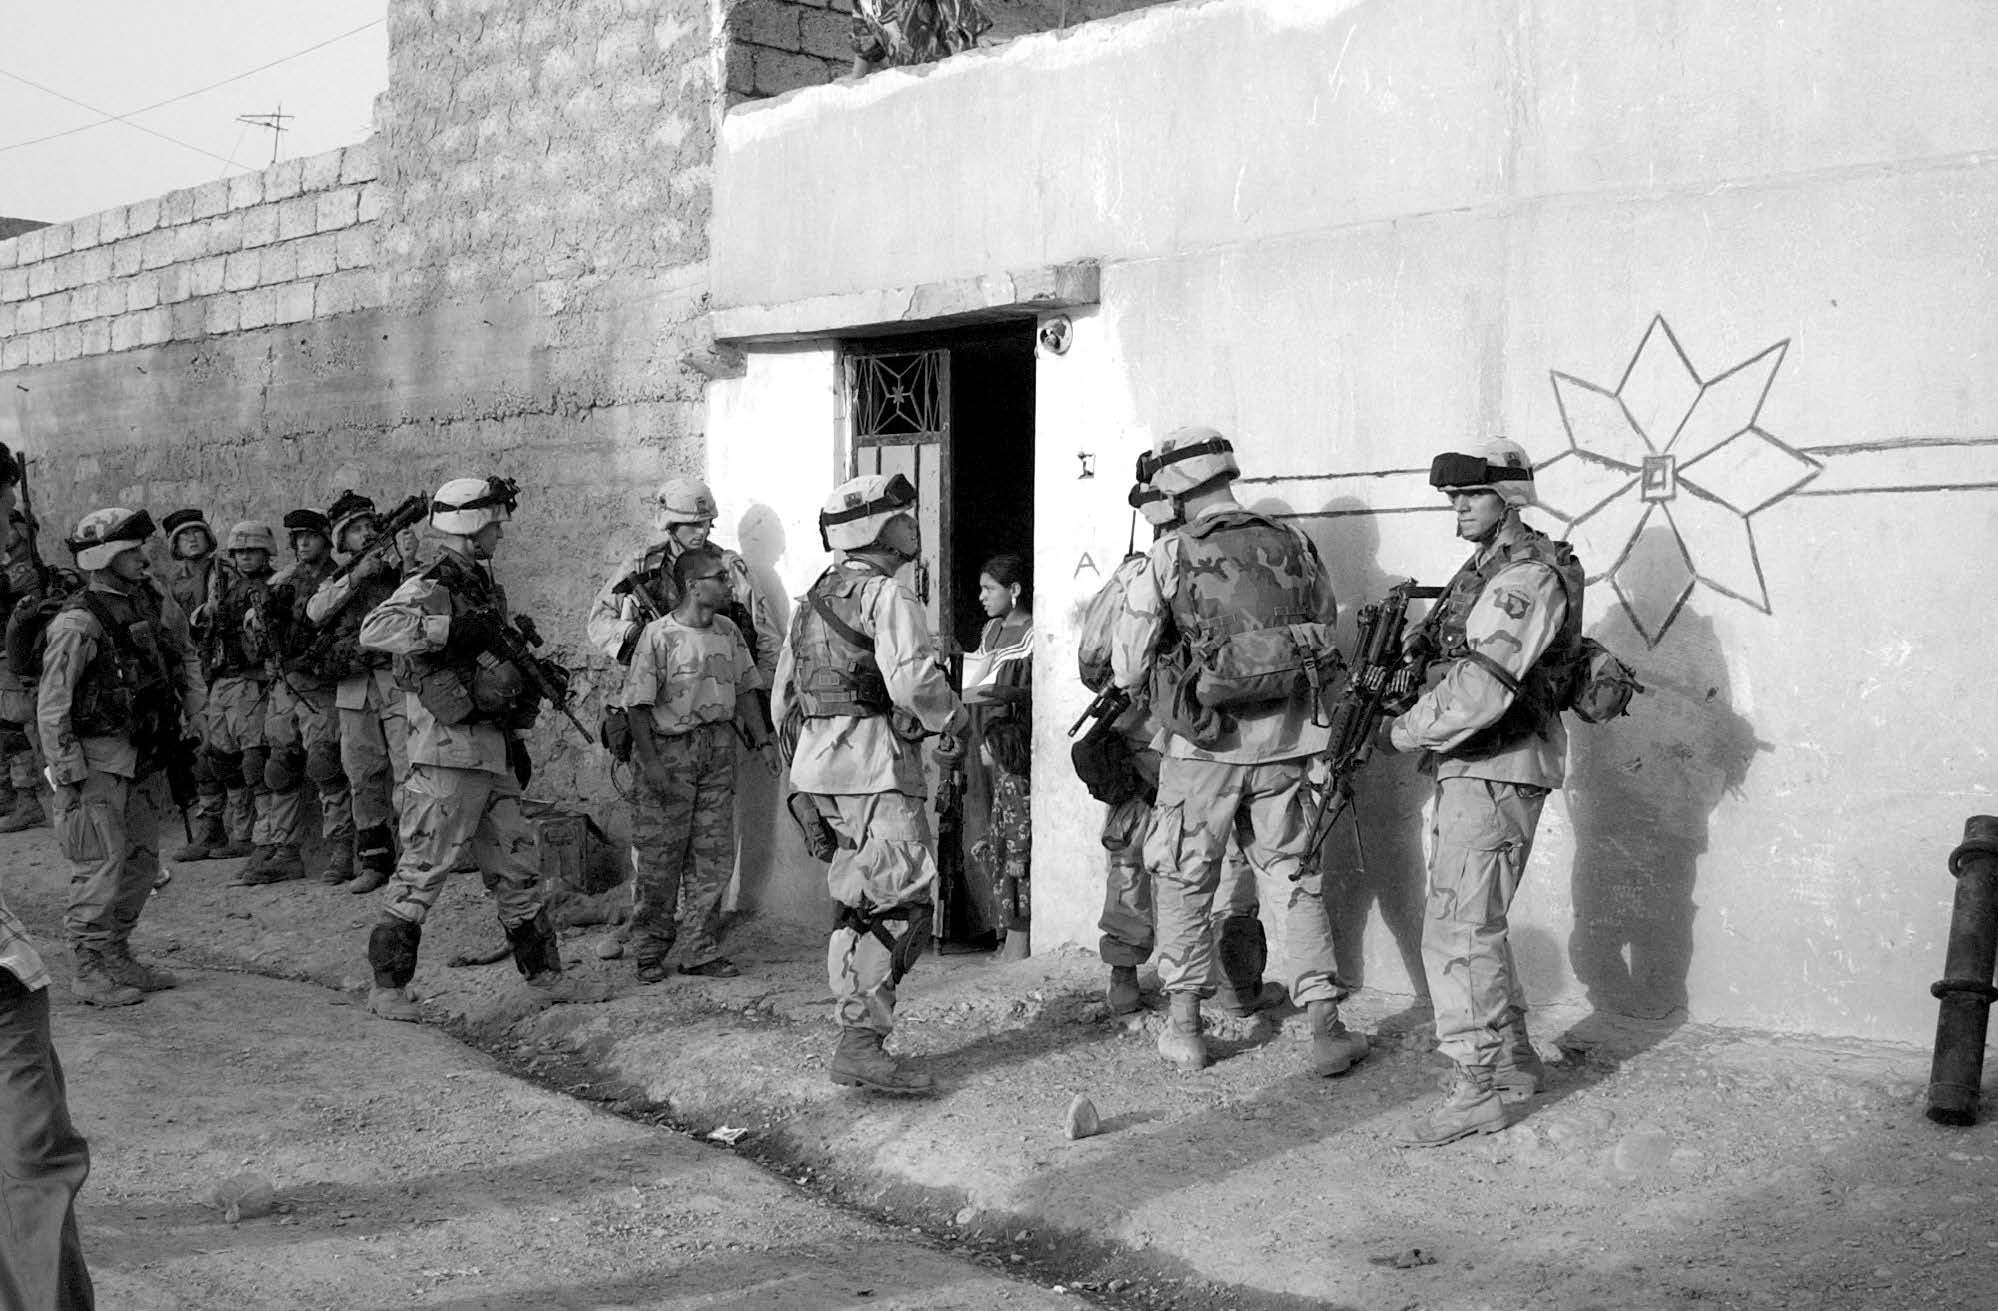 Soldiers from the 101st Airborne Division move from house to house conducting searches looking for weapons in Mosul, Iraq, on June 18, 2003. Courtesy of DoD.